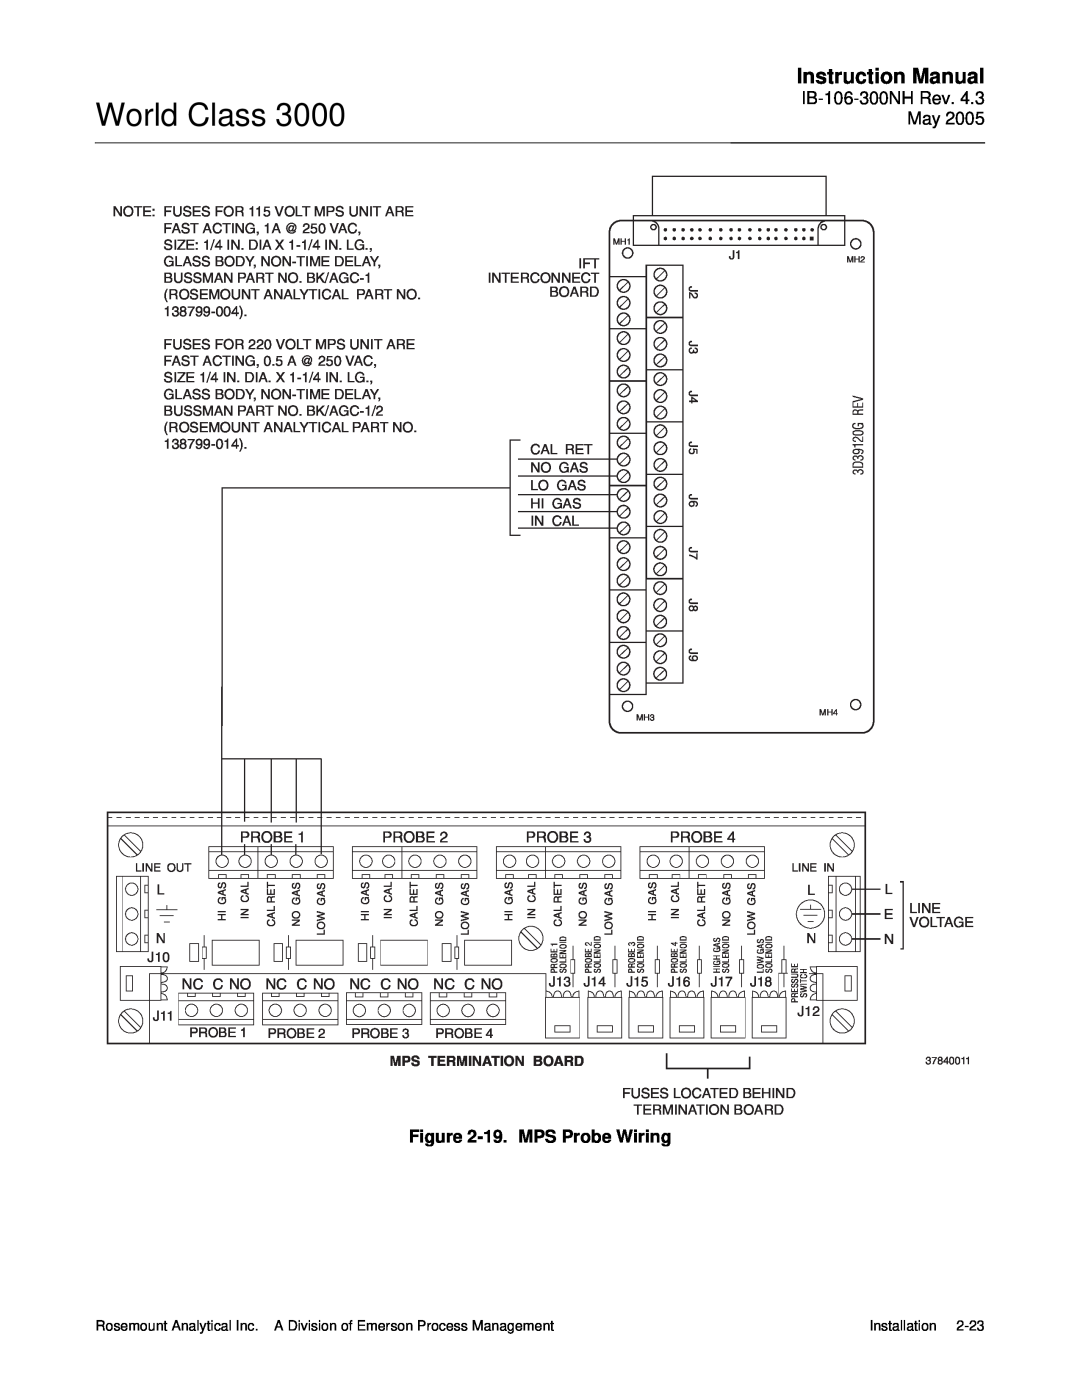 Emerson 3000 instruction manual World Class, Instruction Manual, 19.MPS Probe Wiring, Mps Termination Board 